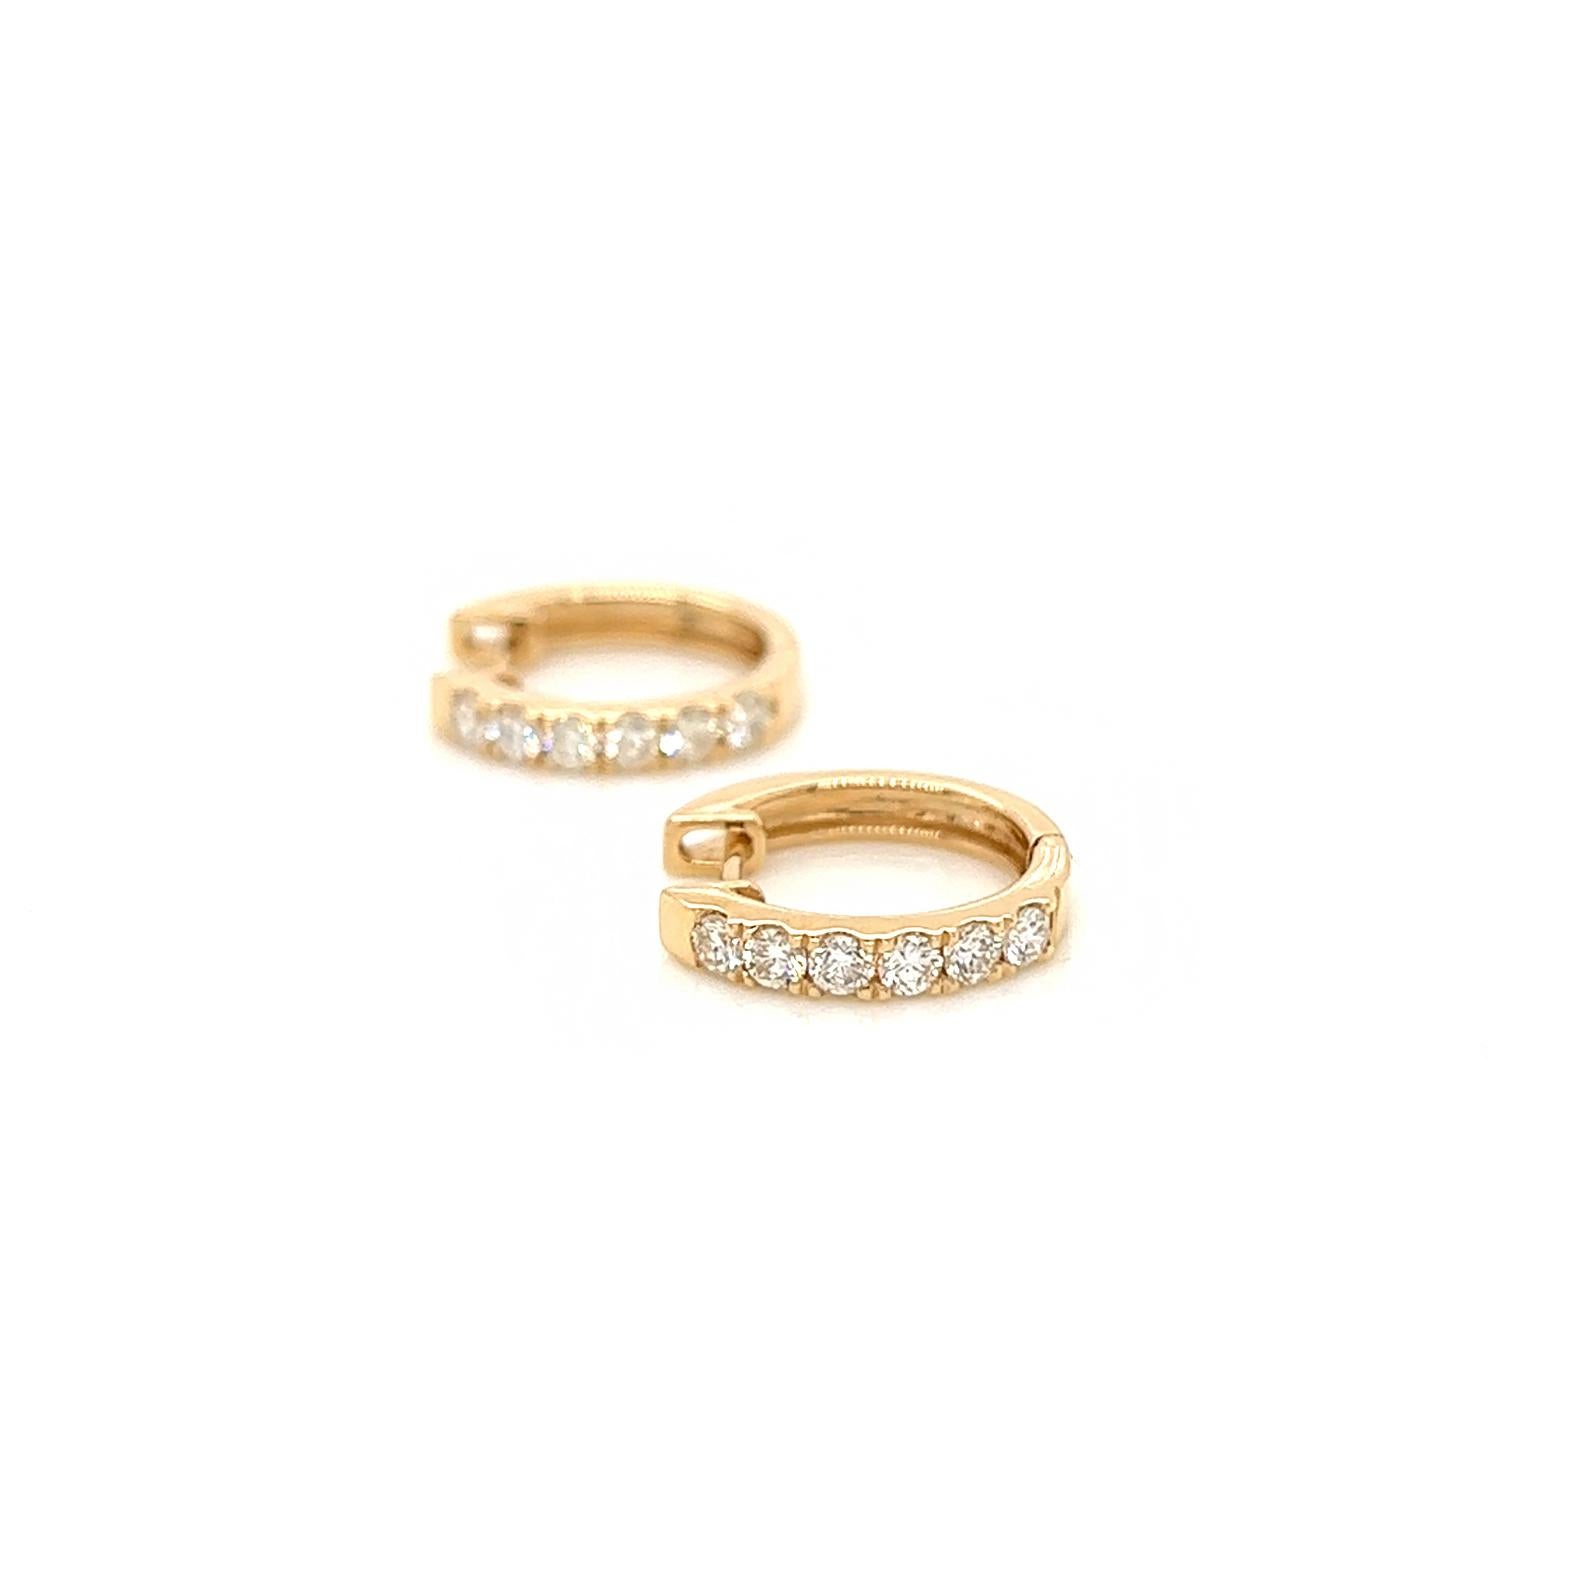 0.42 Carat Diamond Pave-Set Hoop Earrings in 14K Yellow Gold

Excellent as a gift for many occasions as anniversary, graduation, Christmas, birthday, etc. It will for sure add a dazzling touch to your or your beloved's everyday style.